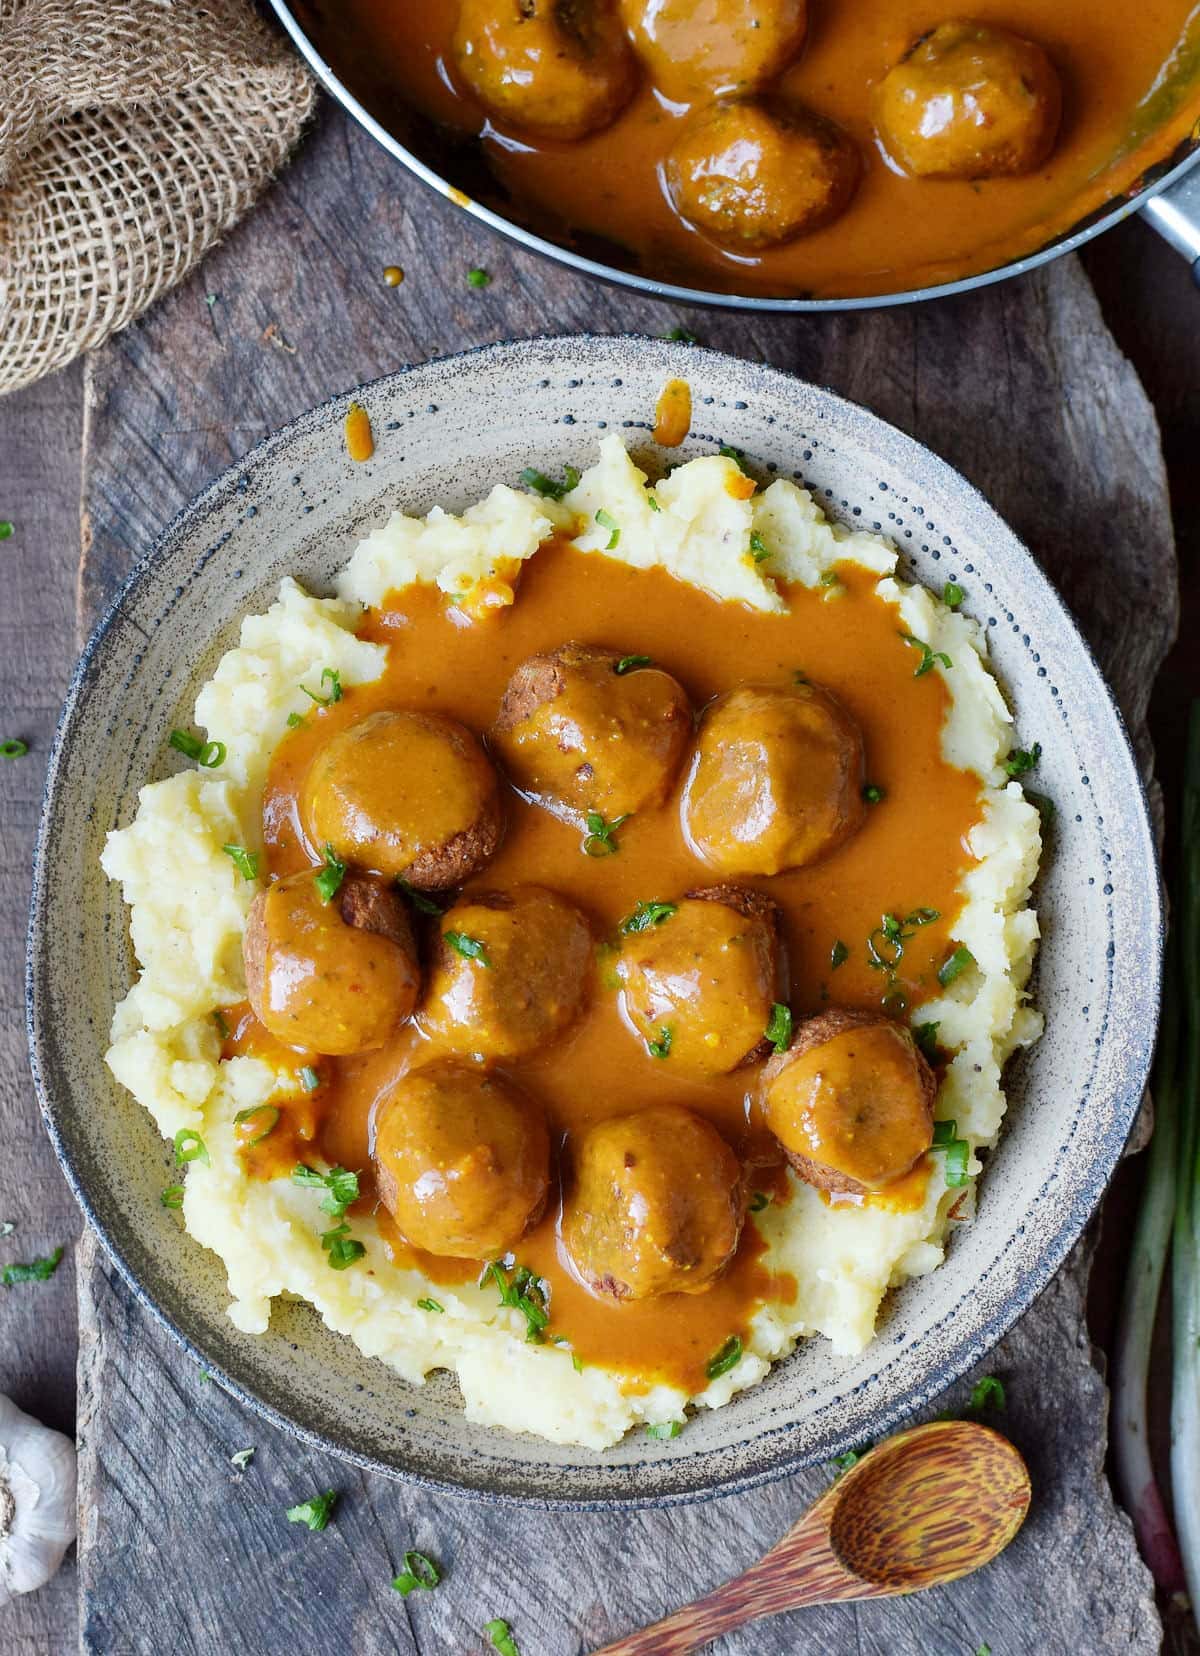 vegan meatballs with gravy over mashed potatoes in large bowl